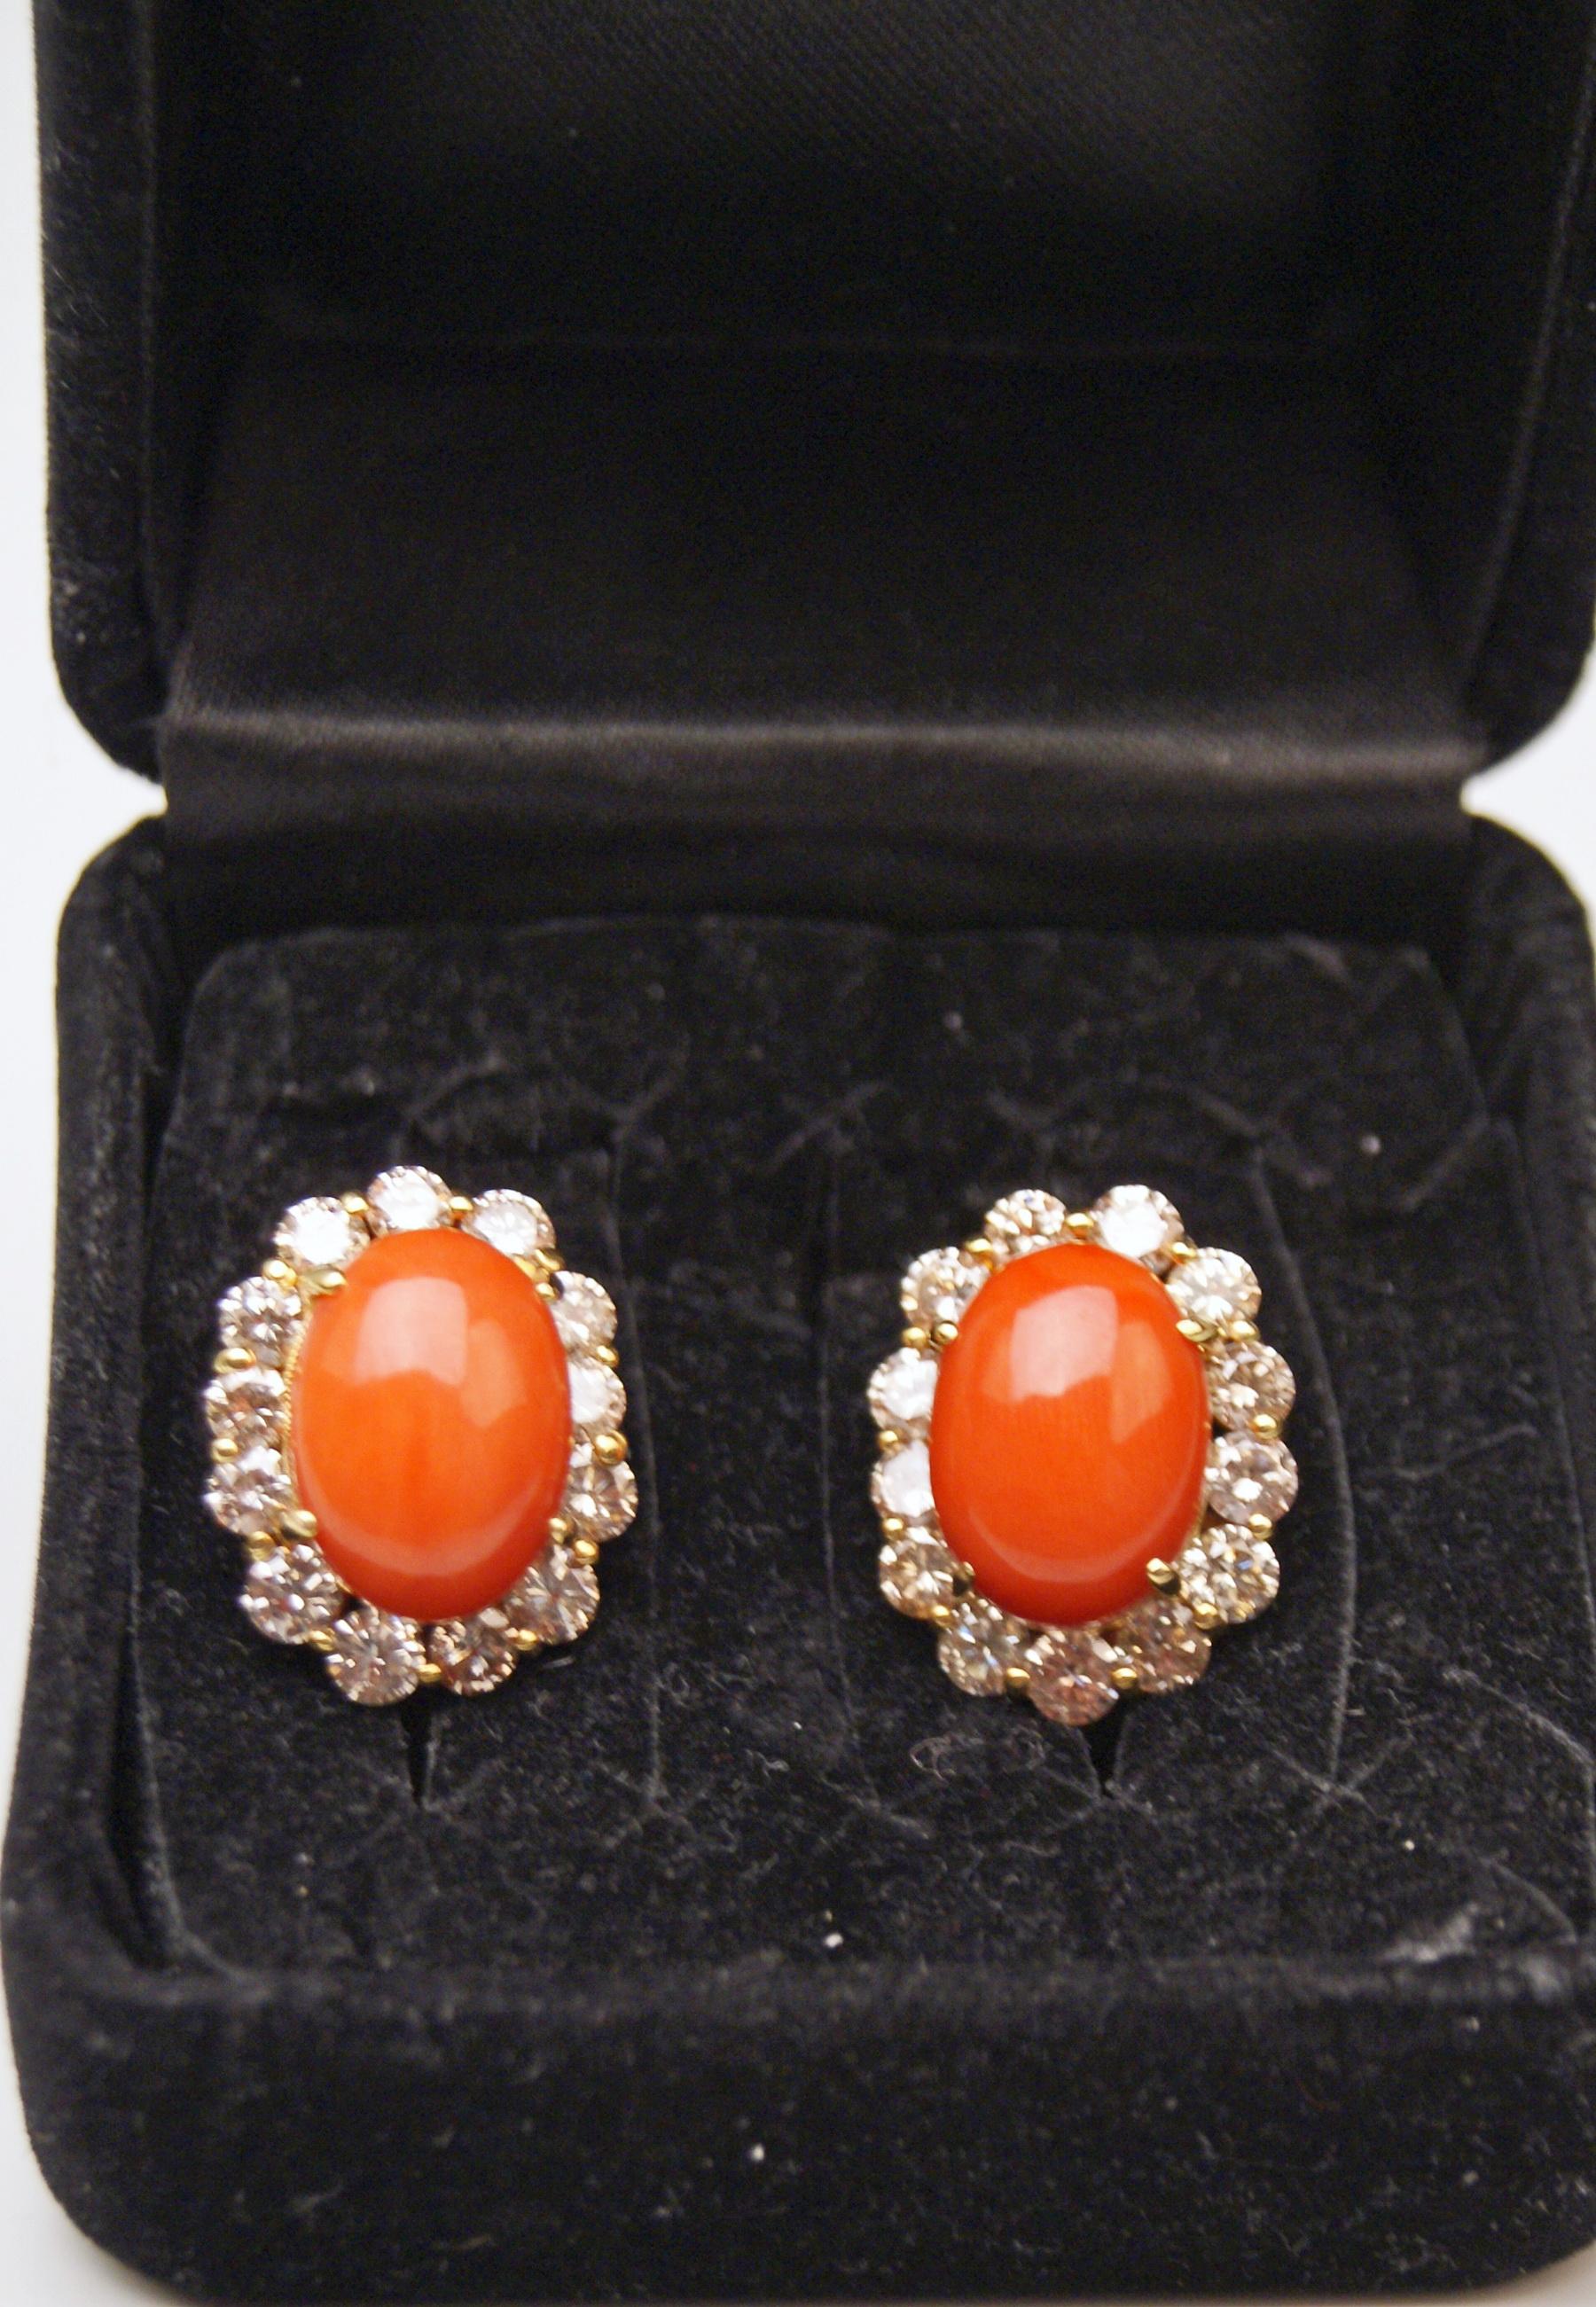 Stunning Viennese Pair of Golden Cluster Earrings:
There is a large oval coral attached to middle area of each earring / the coral is surrounded by a superb ring consisting of finest diamonds having weight of FOUR CARATS IN TOTAL.  These earrings